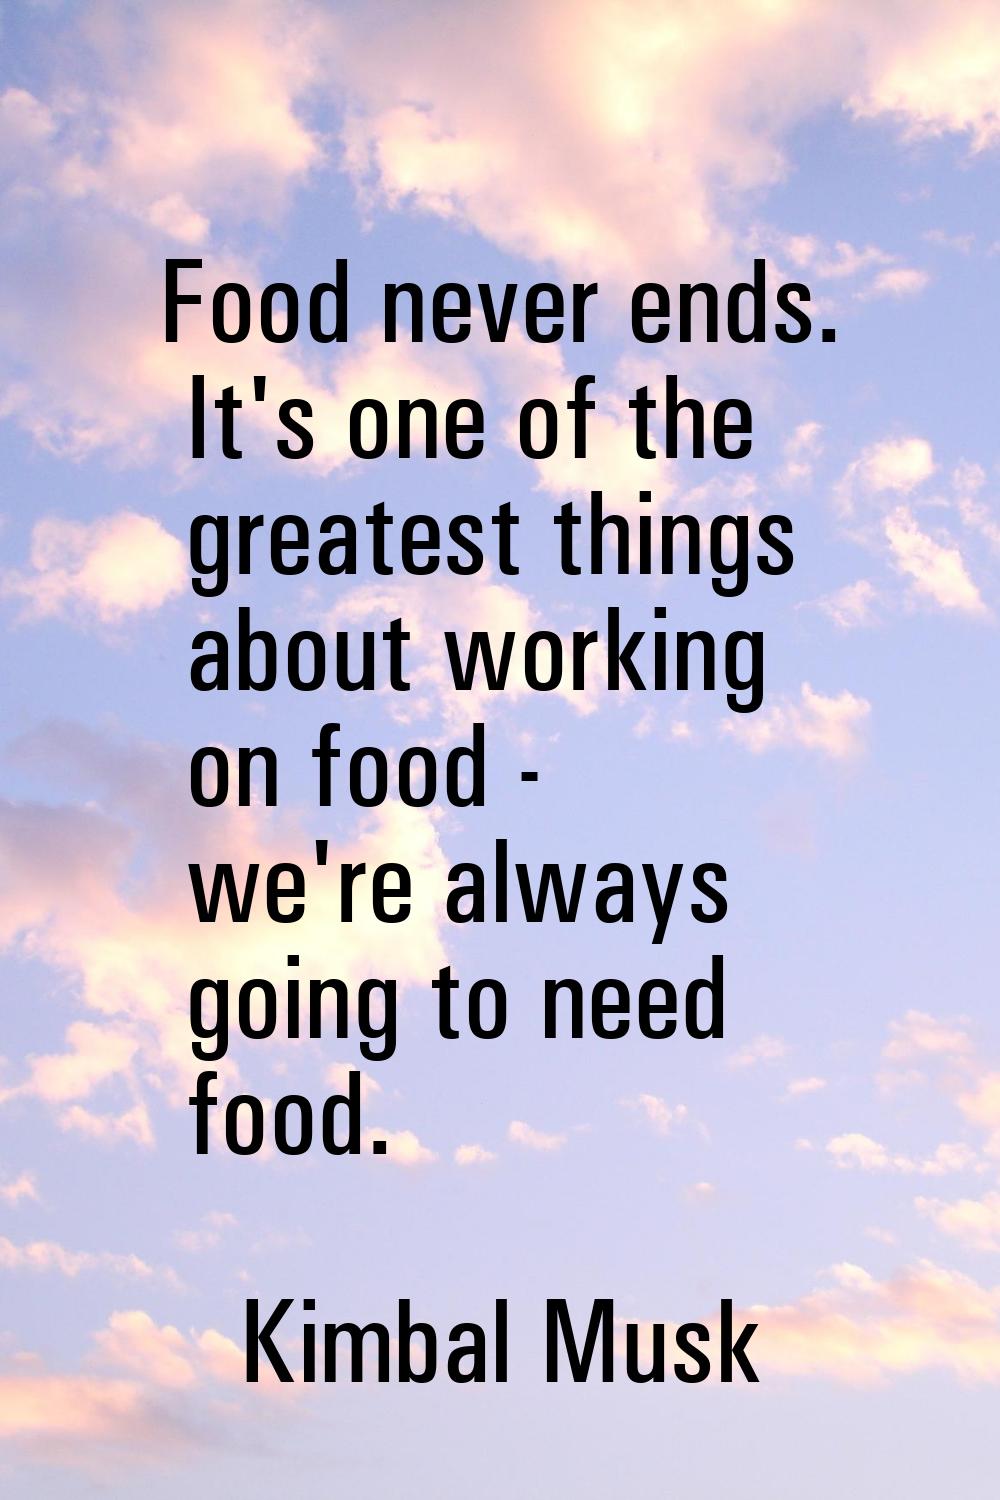 Food never ends. It's one of the greatest things about working on food - we're always going to need